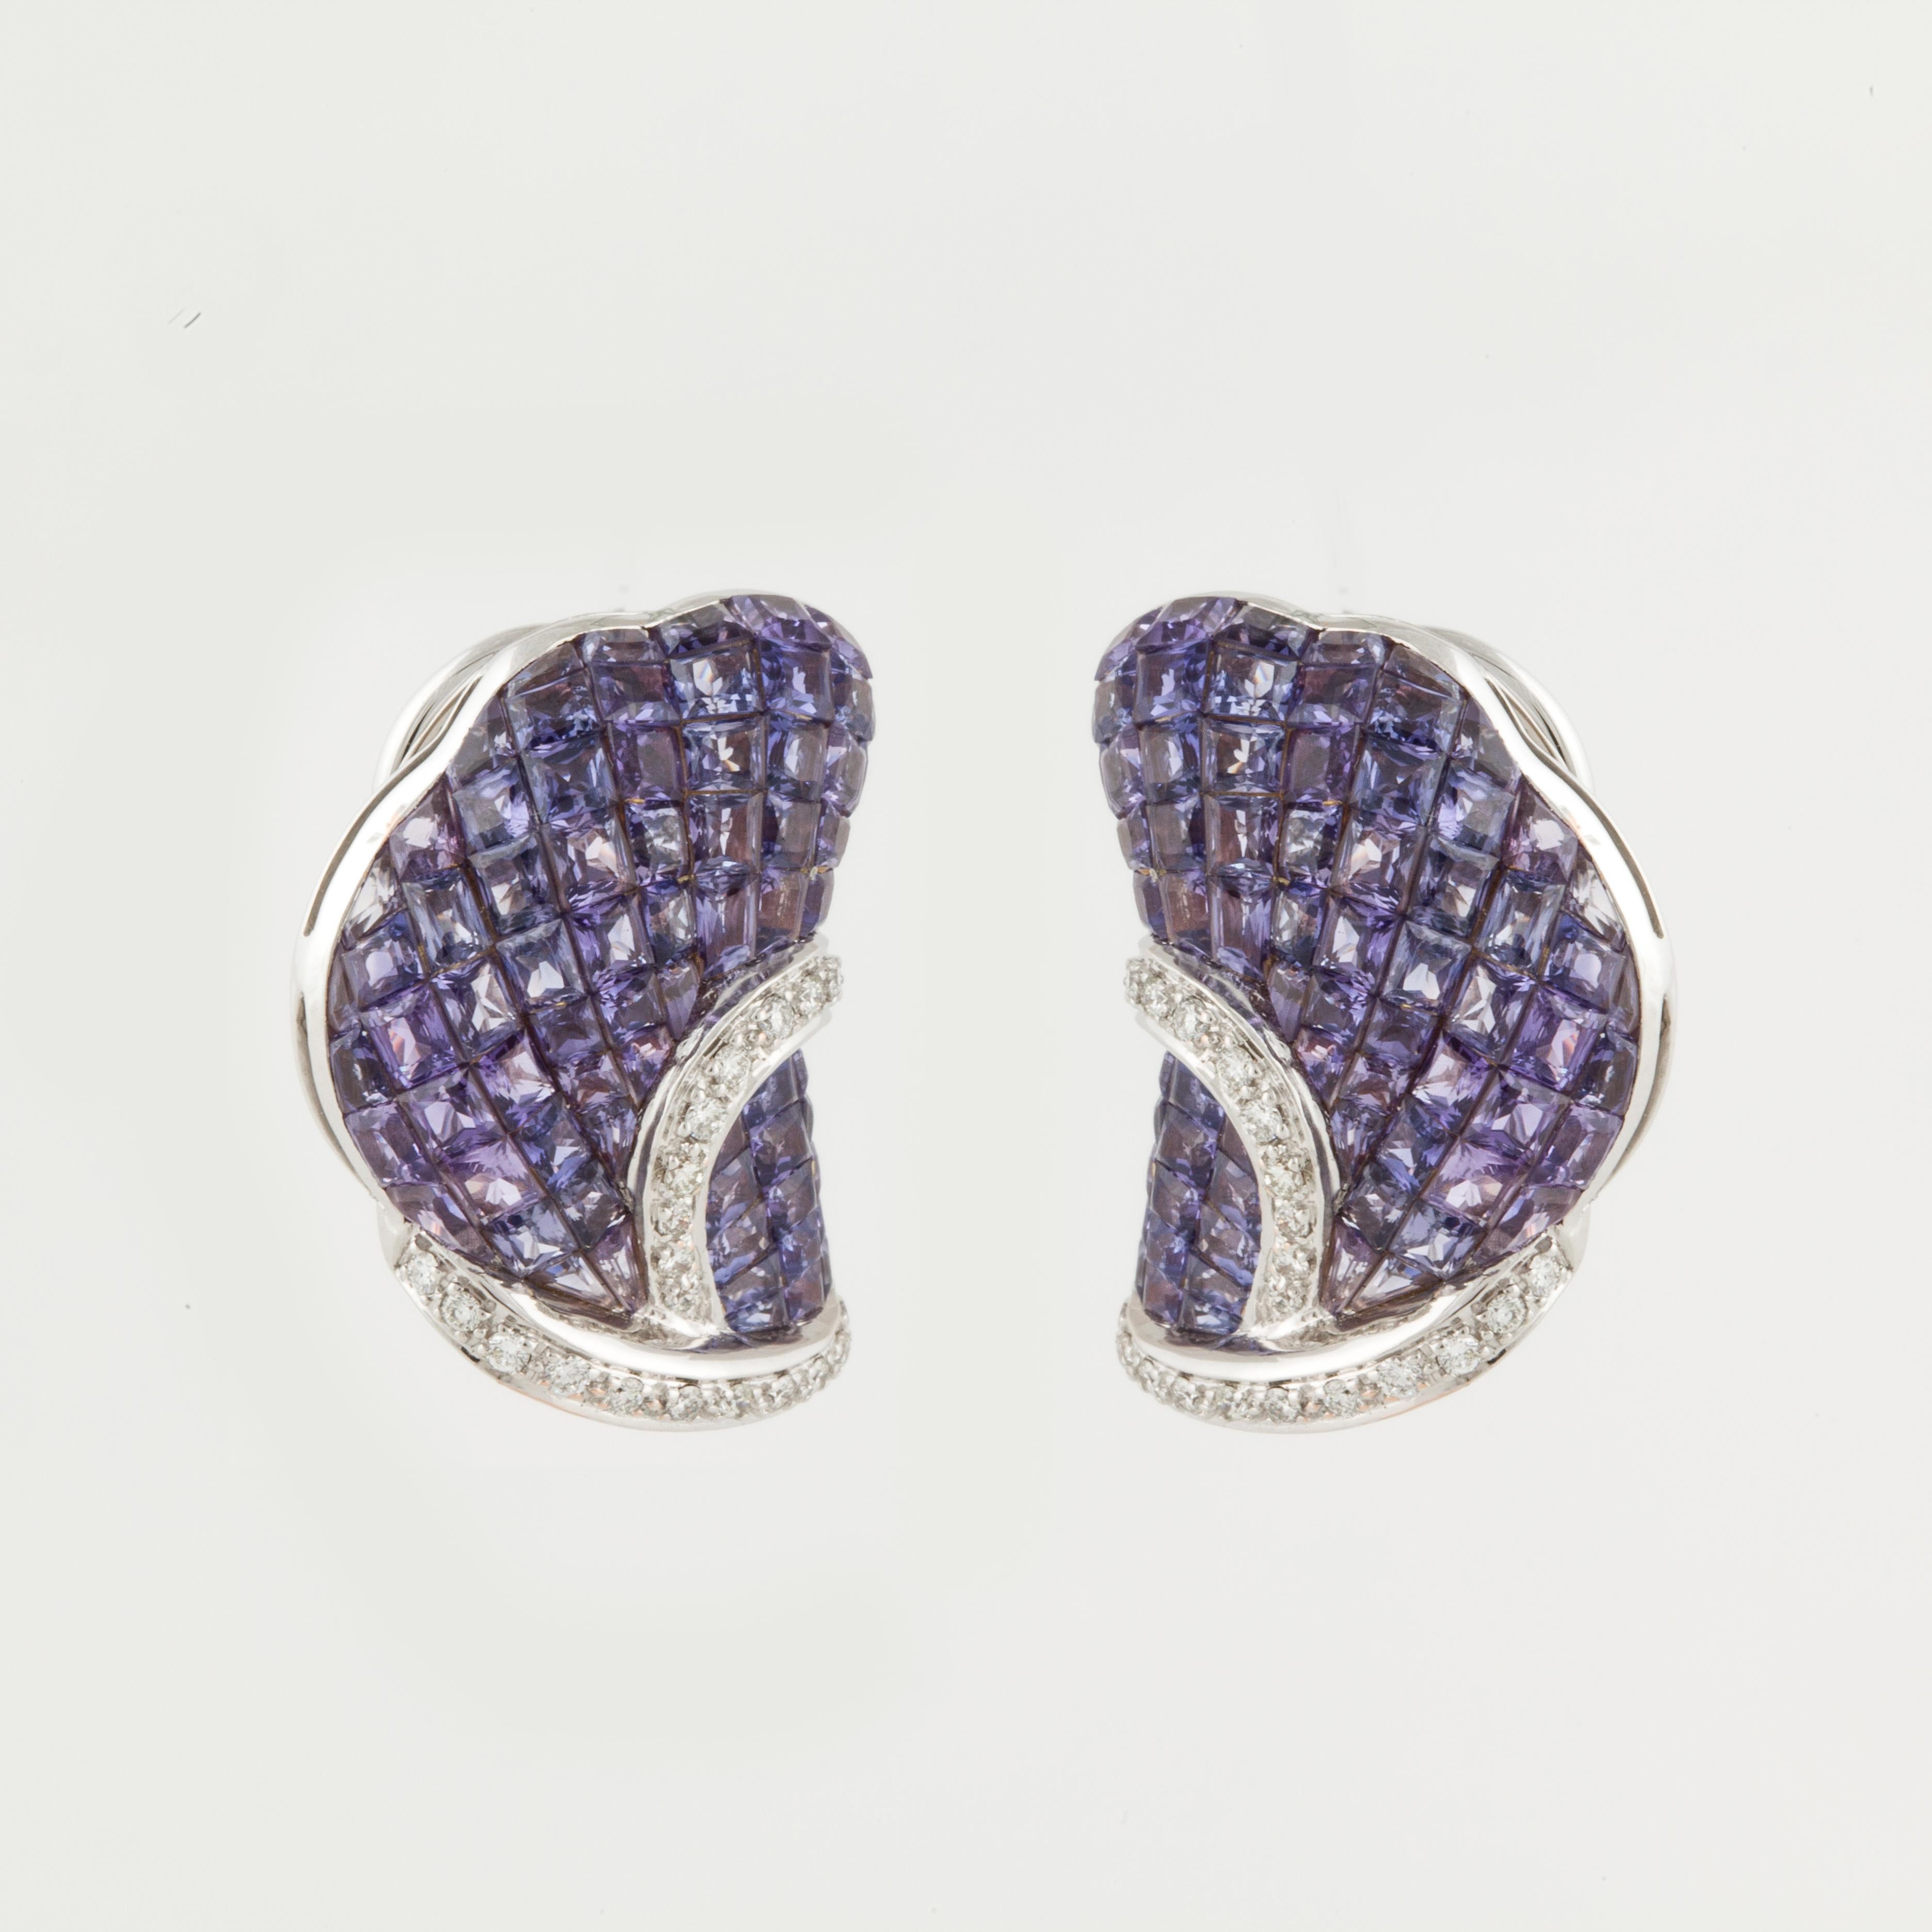 18K white gold earrings with invisible-set purple sapphires and diamonds designed by Nini.    There are 140 princess-cut purple sapphires that total 18.50 carats.  In addition, there are 44 round diamonds totaling 0.65 carats; H-I color and VS2